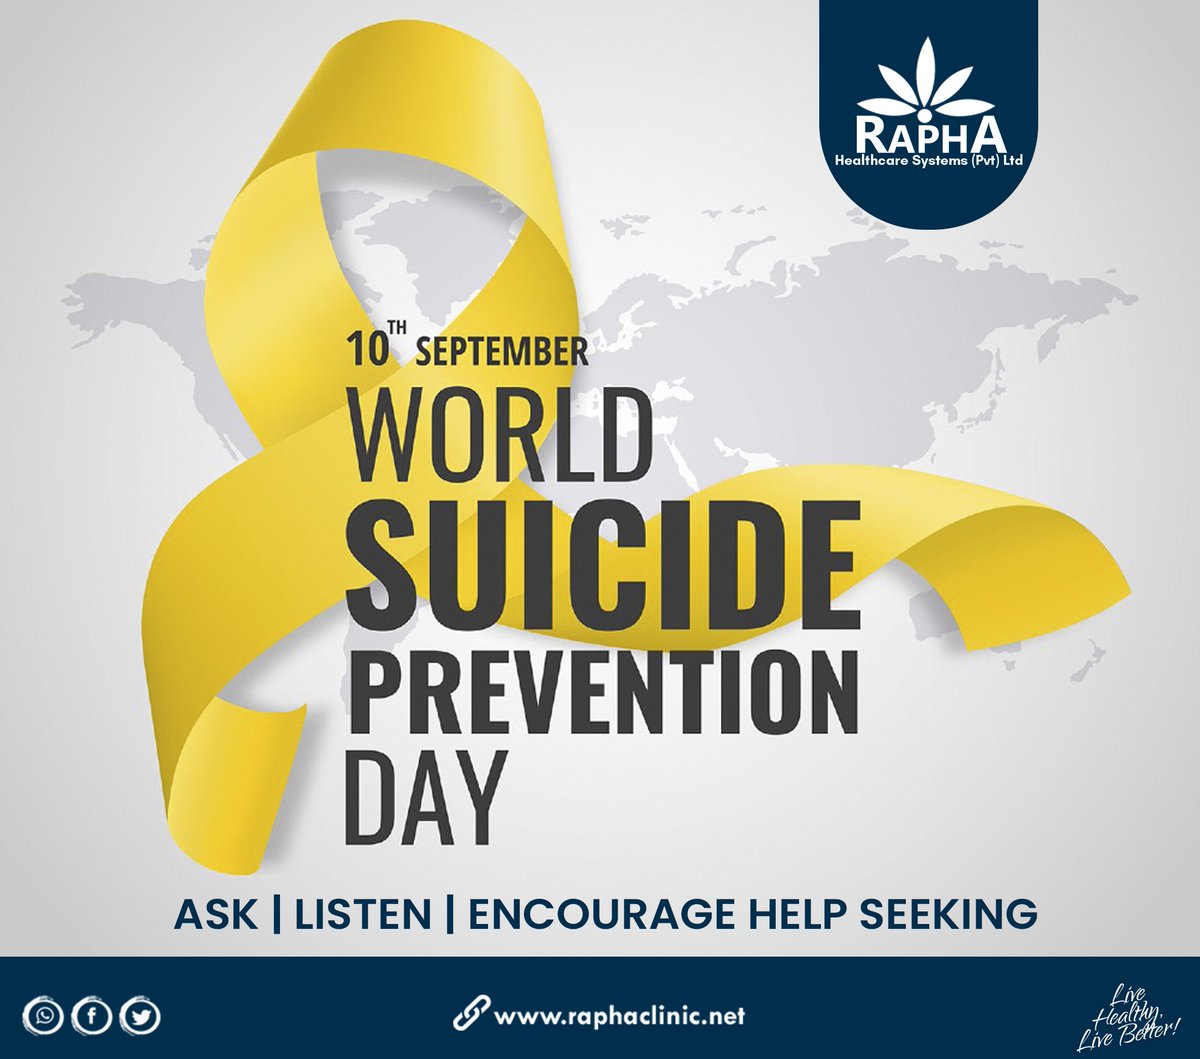 Suicide can be prevented! Take a minute to ask, listen and encourage to seek help.

#WorldSuicidePreventionDay #WSPD2021  #suicidprevention2021 #suicidalawarenessmonth #suicide #RaphaCares